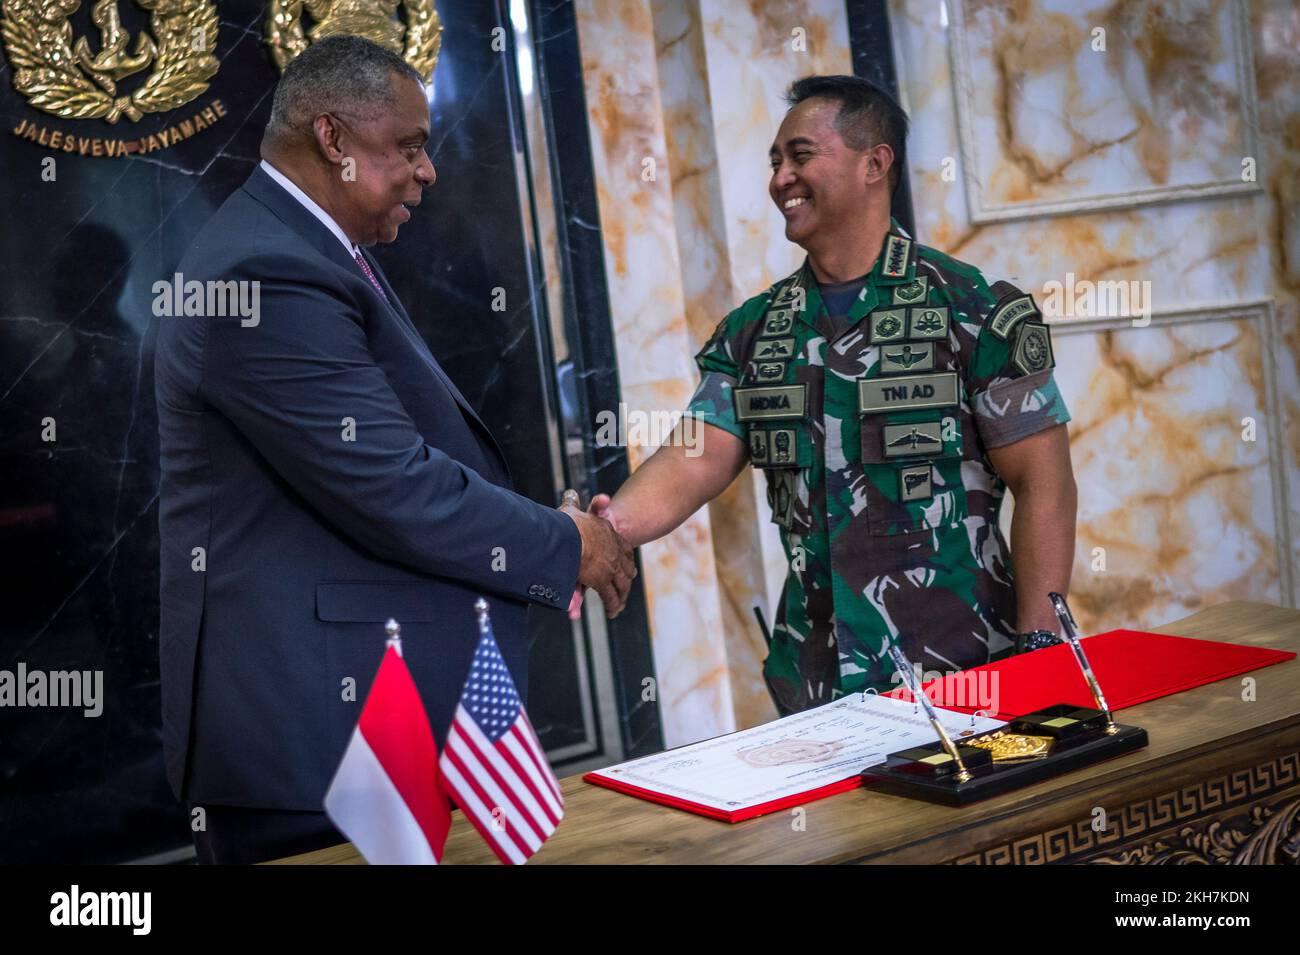 Jakarta, Indonesia. 21 November, 2022. U.S. Secretary of Defense Lloyd J. Austin III, left, shakes hands with Indonesian Gen. Andika Perkasa, Commander National Armed Forces after signing an agreement on force modernization at the Indonesian military headquarters, November 21, 2022 in Jakarta, Indonesia. Credit: Chad J. McNeeley/DOD/Alamy Live News Stock Photo